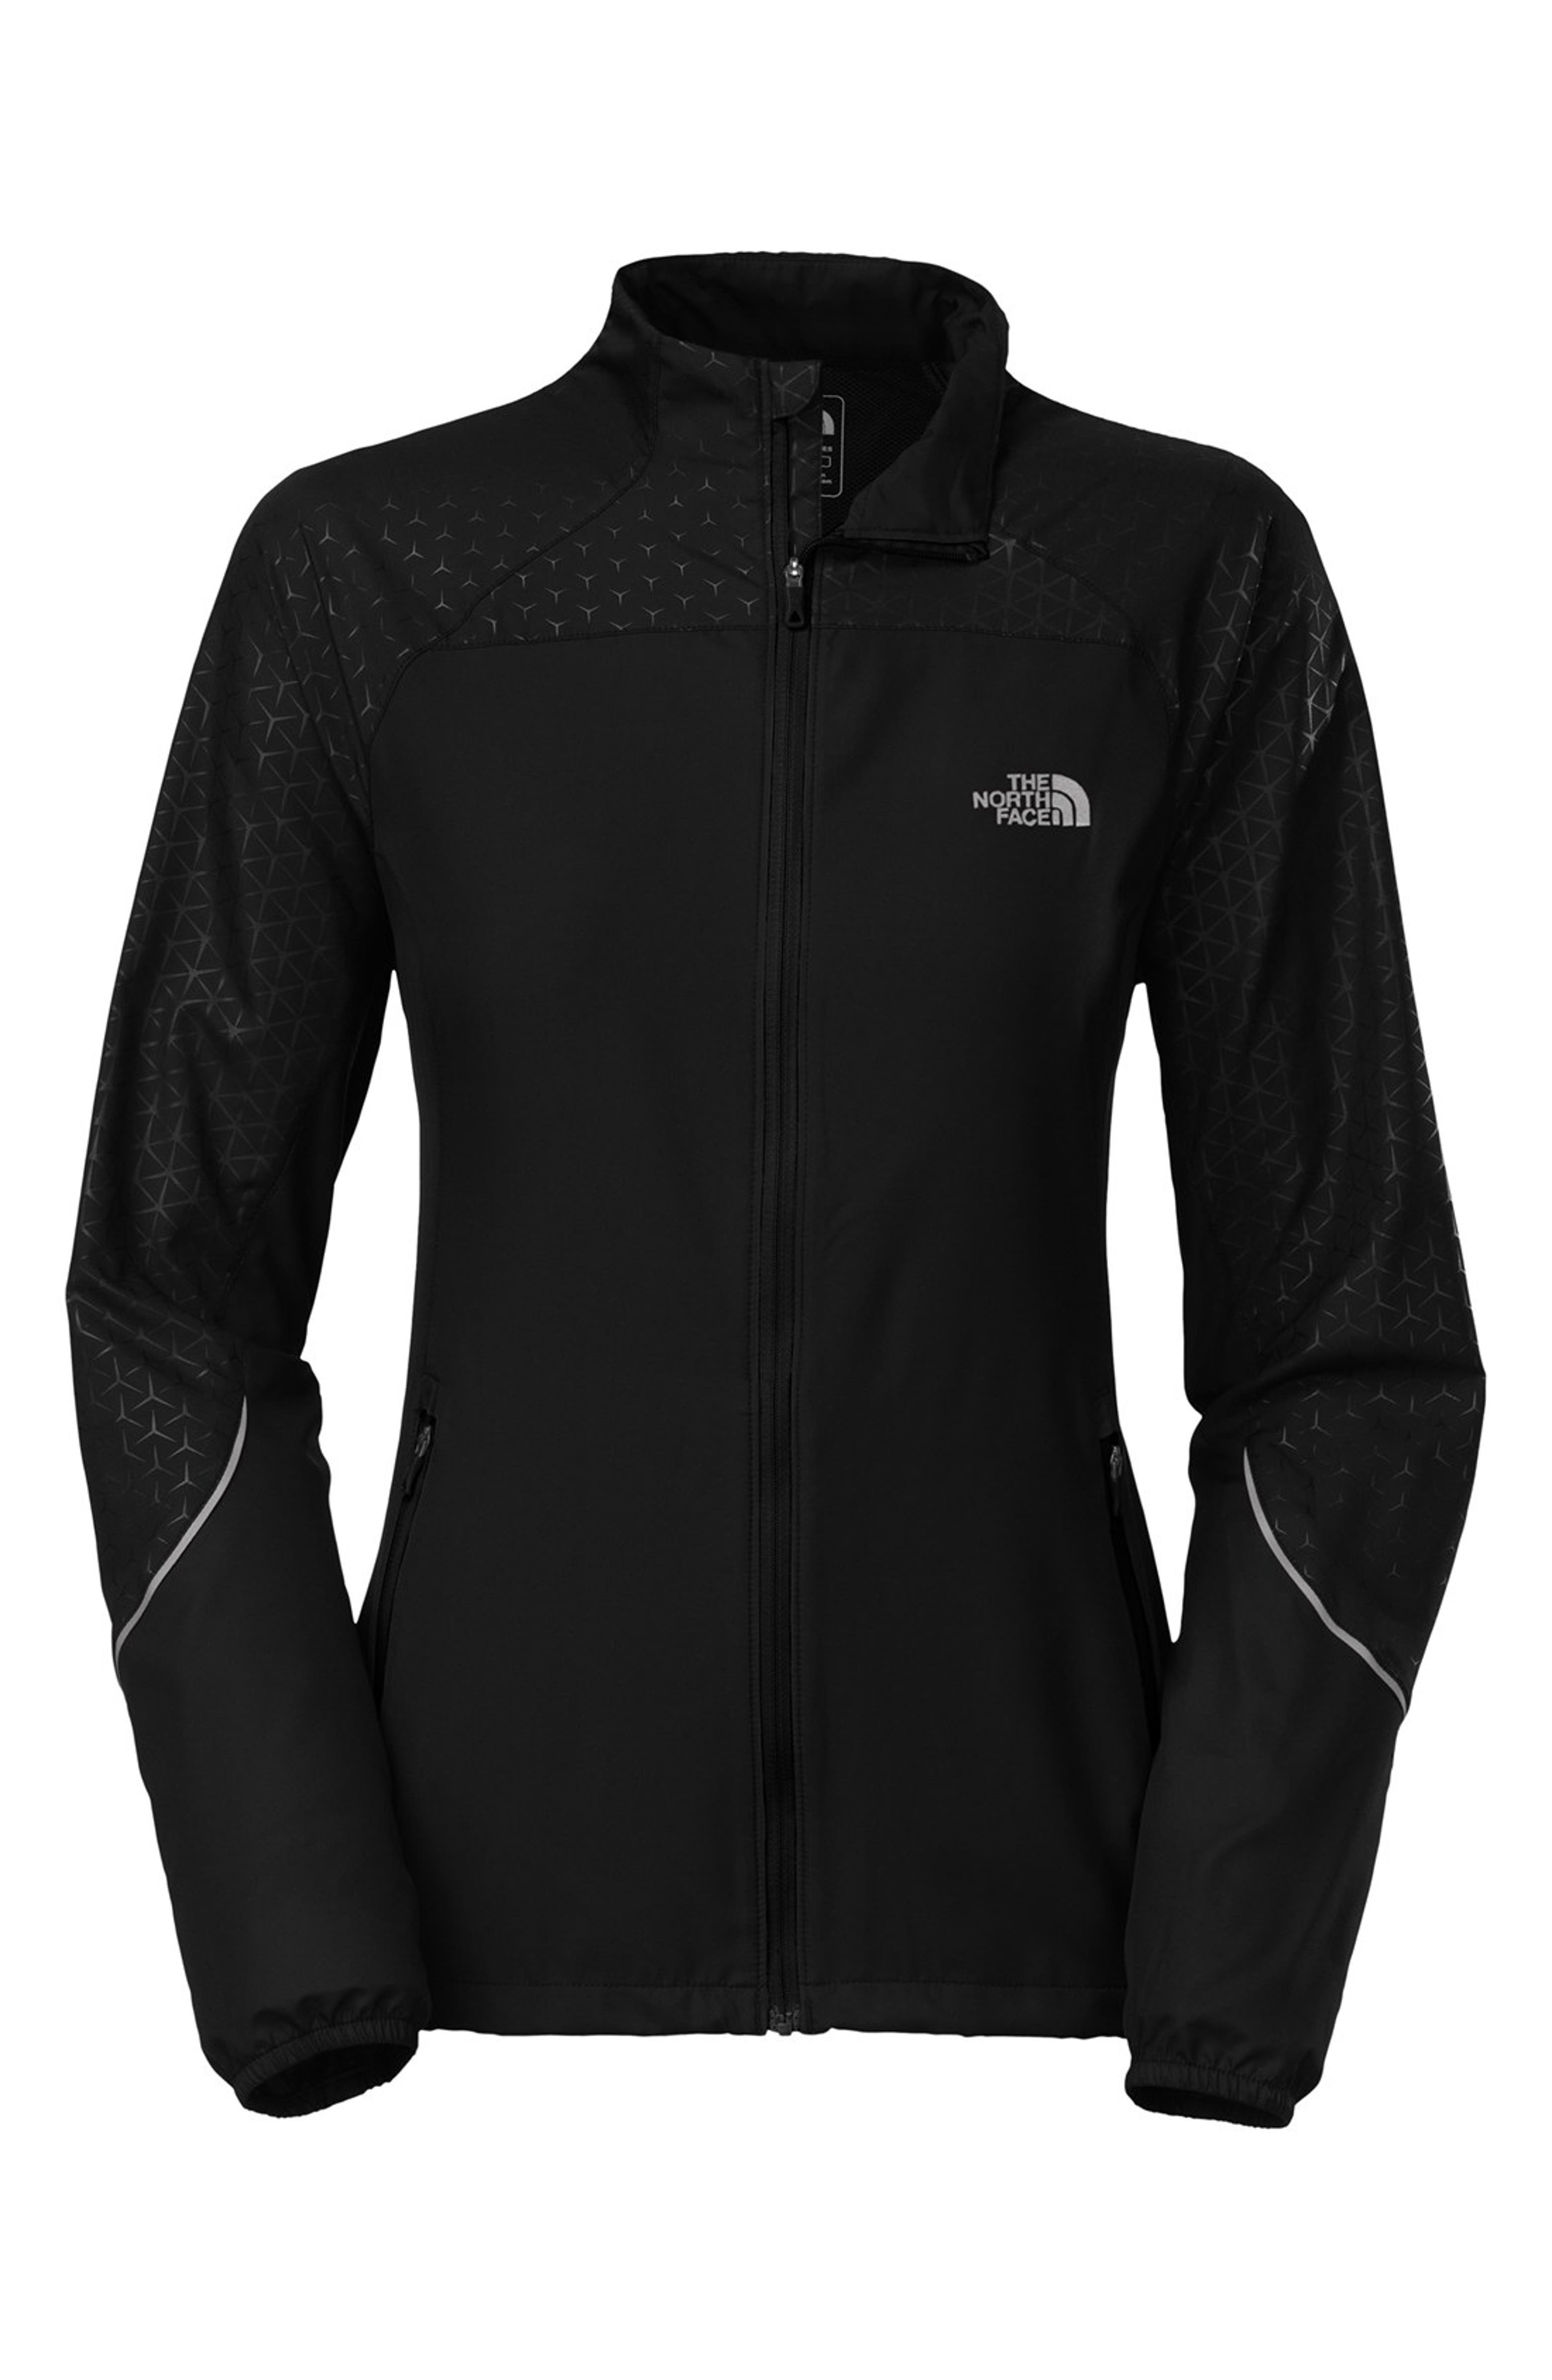 The North Face 'Torpedo' Jacket | Nordstrom